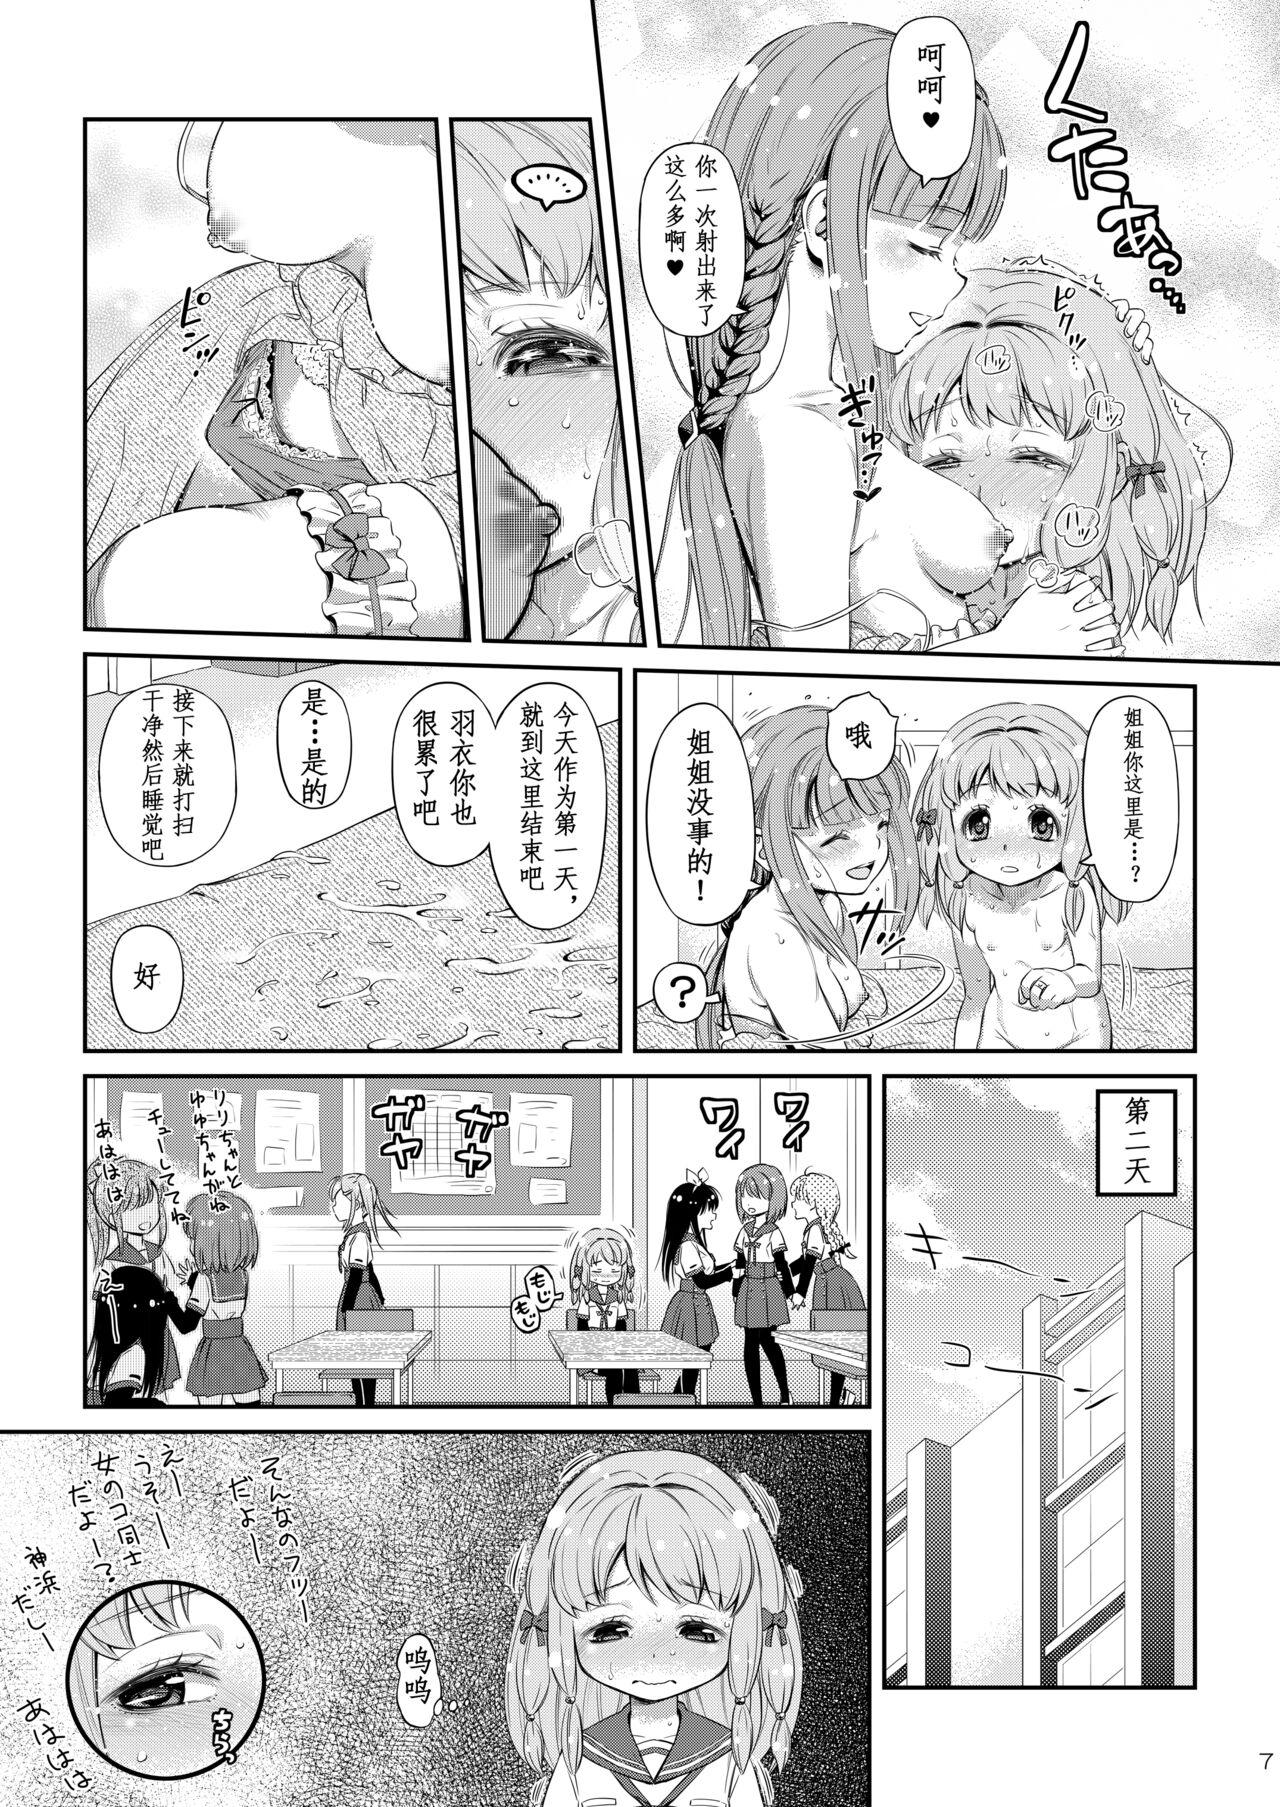 Trimmed Dear My Little Sister - Puella magi madoka magica side story magia record Style - Page 7